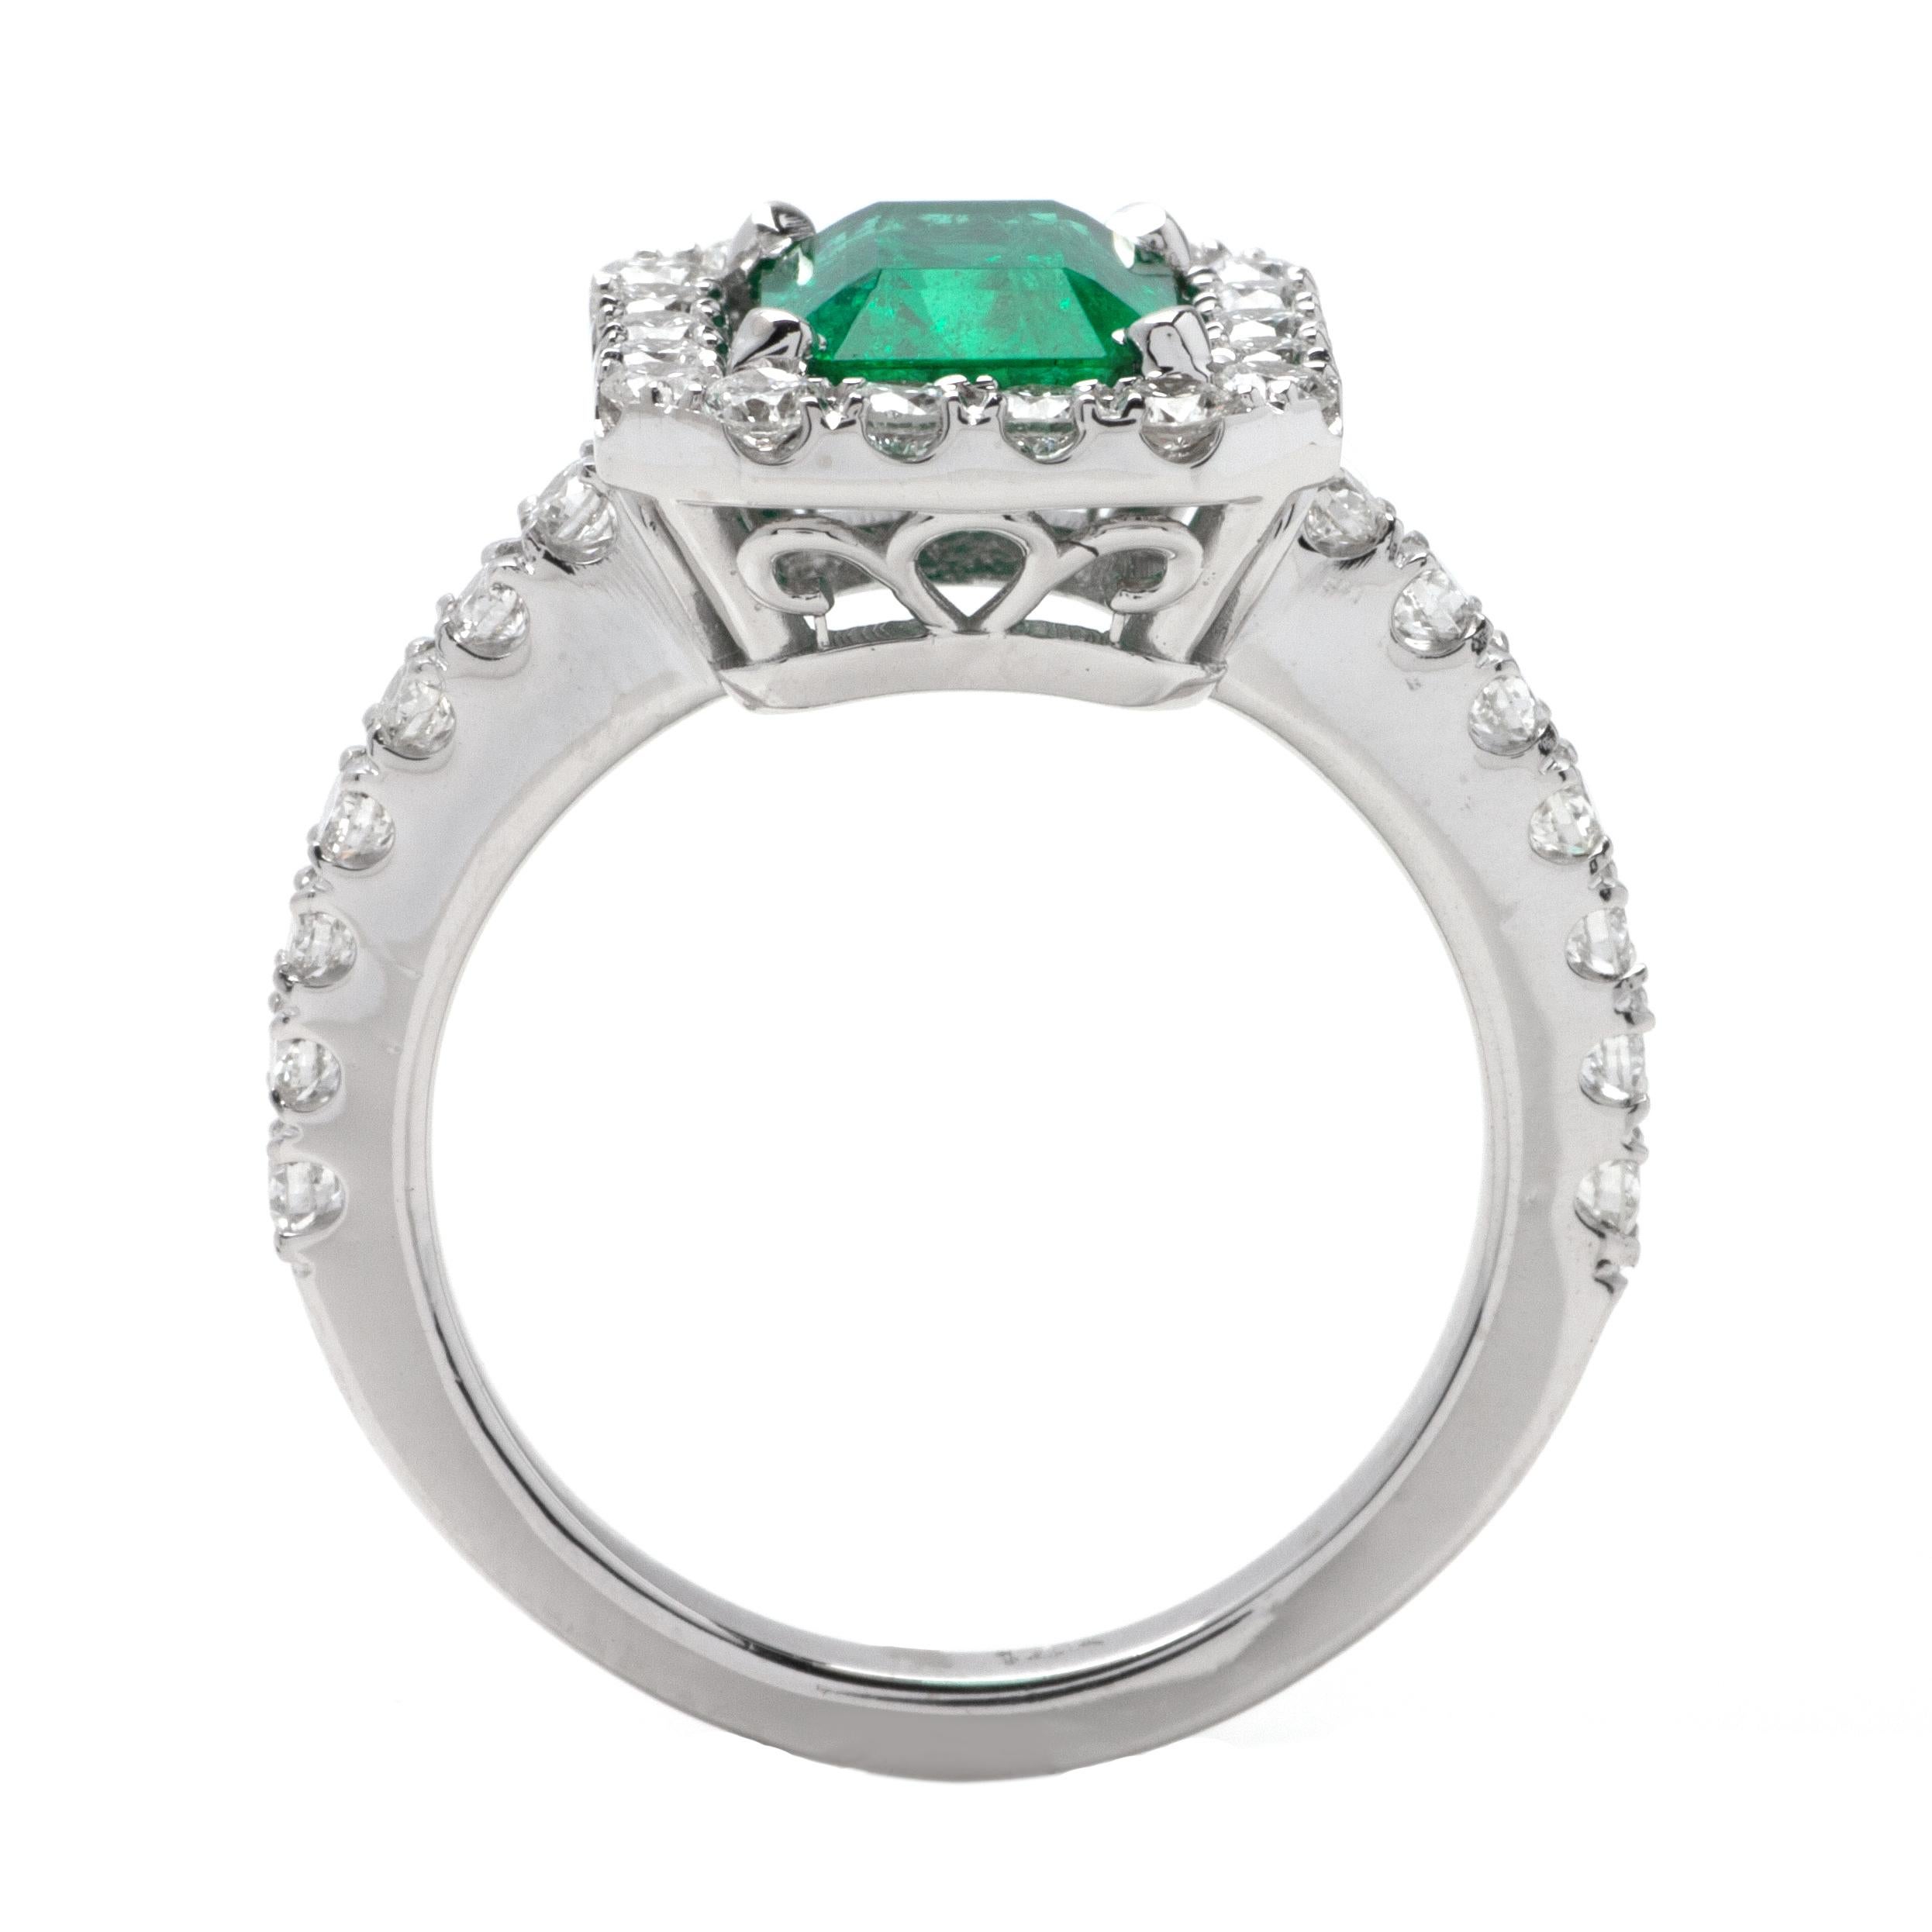 This ring features a halo design of G color, VS1 clarity, and 0.90ct Round side diamonds set in 14K white gold. The center gemstone is a 1.90ct green emerald. 